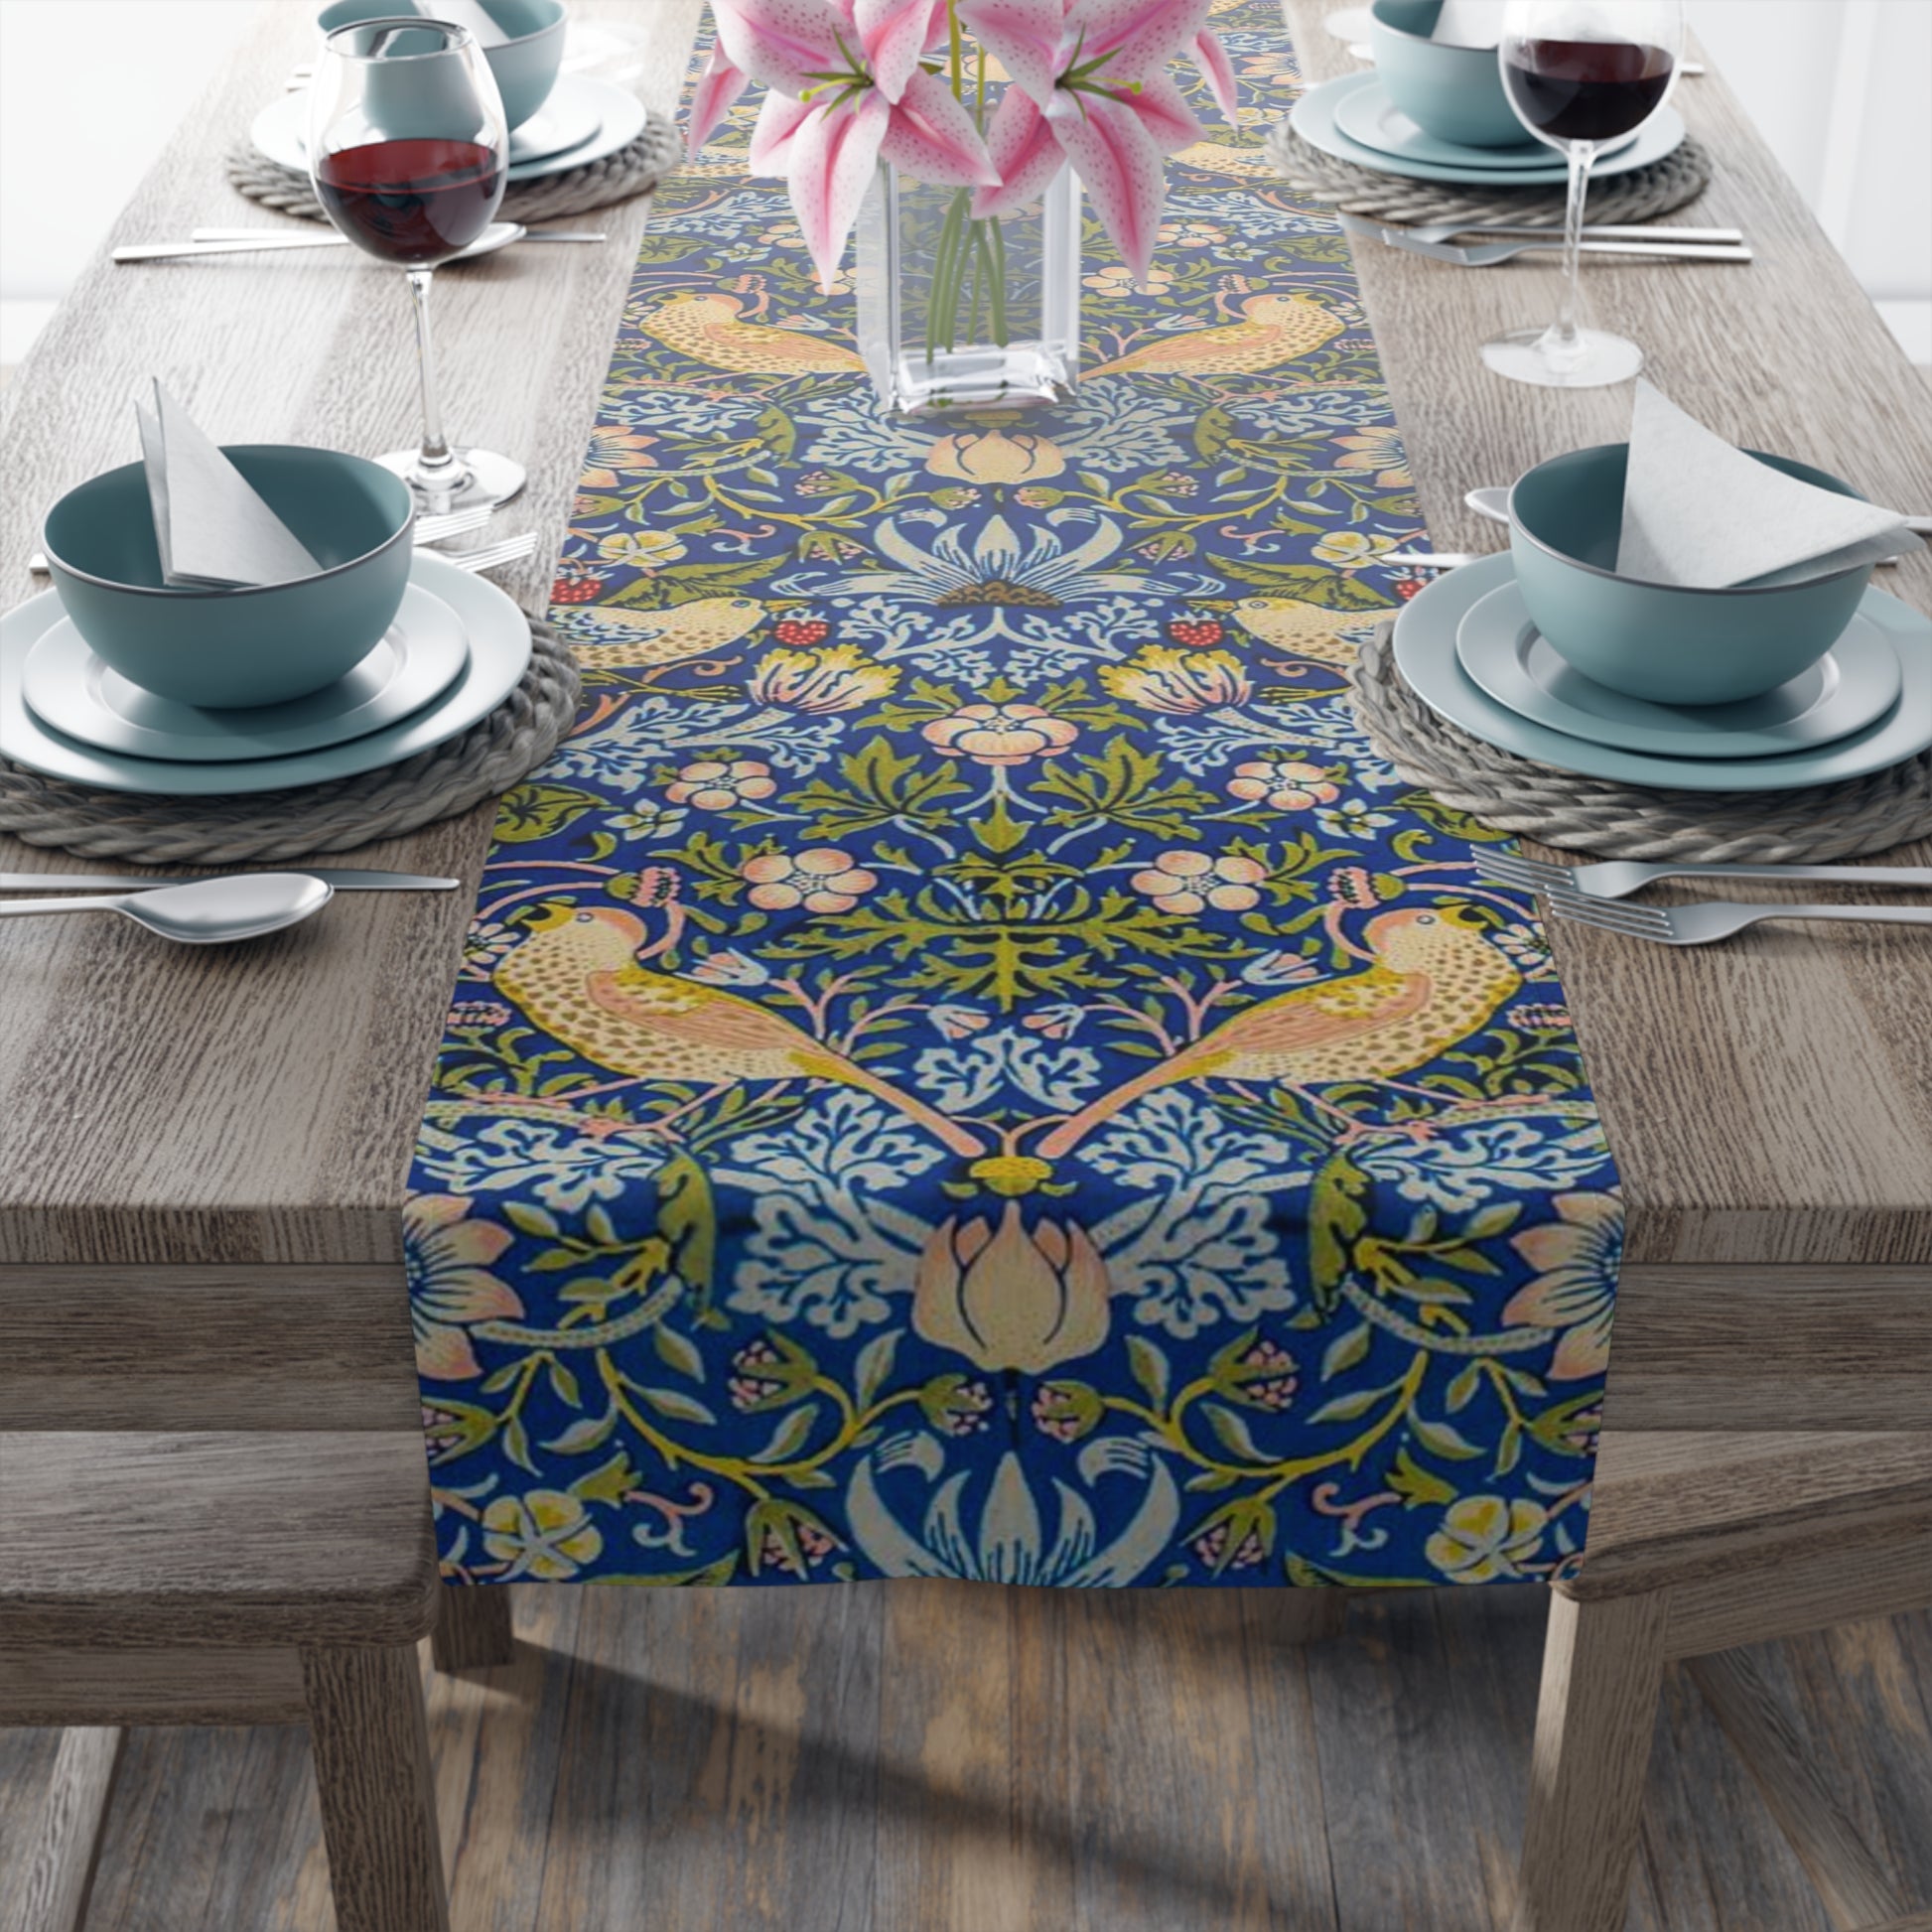 william-morris-co-table-runner-strawberry-thief-collection-indigo-5